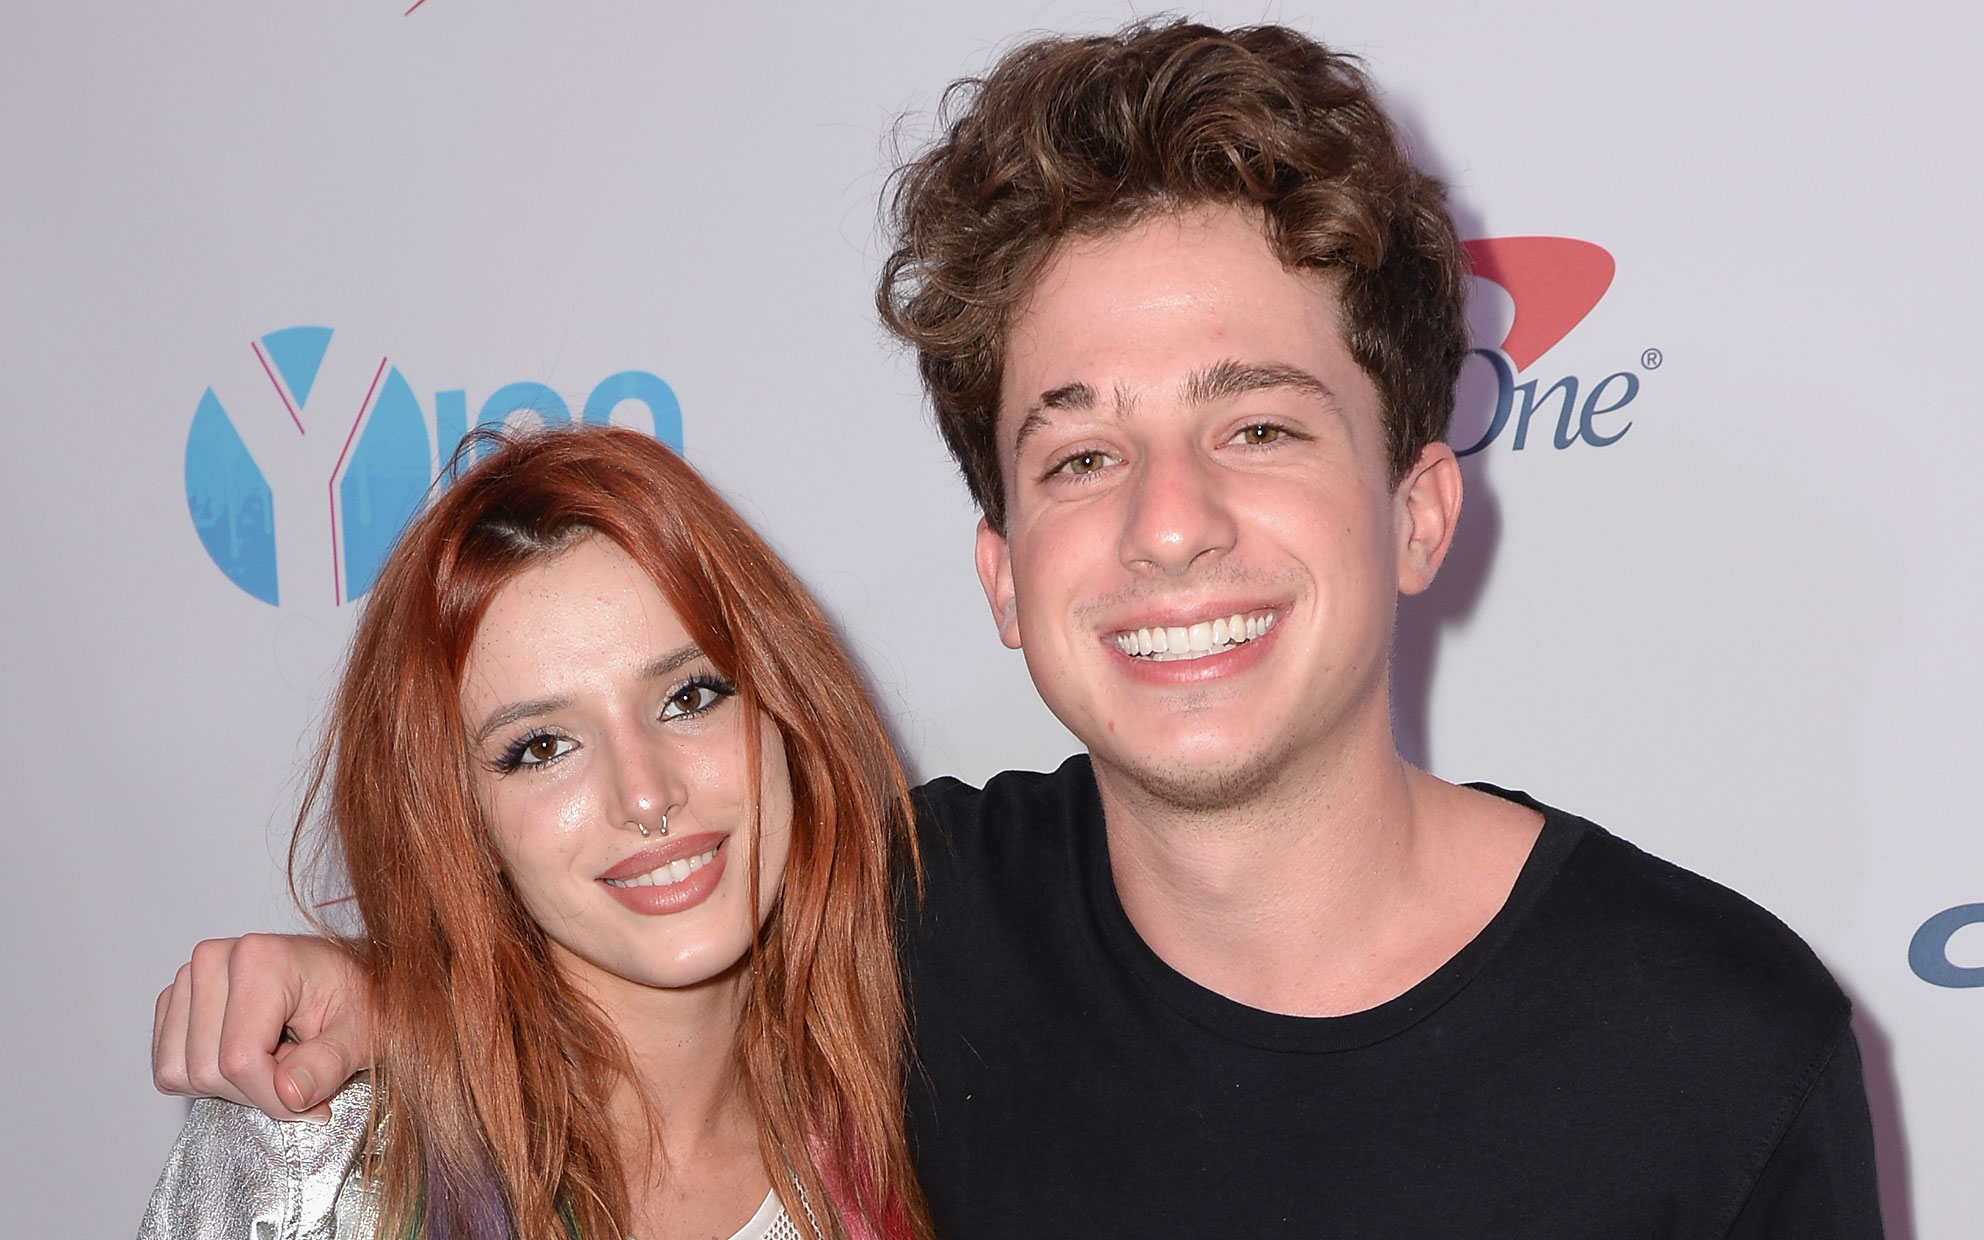 What is Charlie Puth's most famous song?